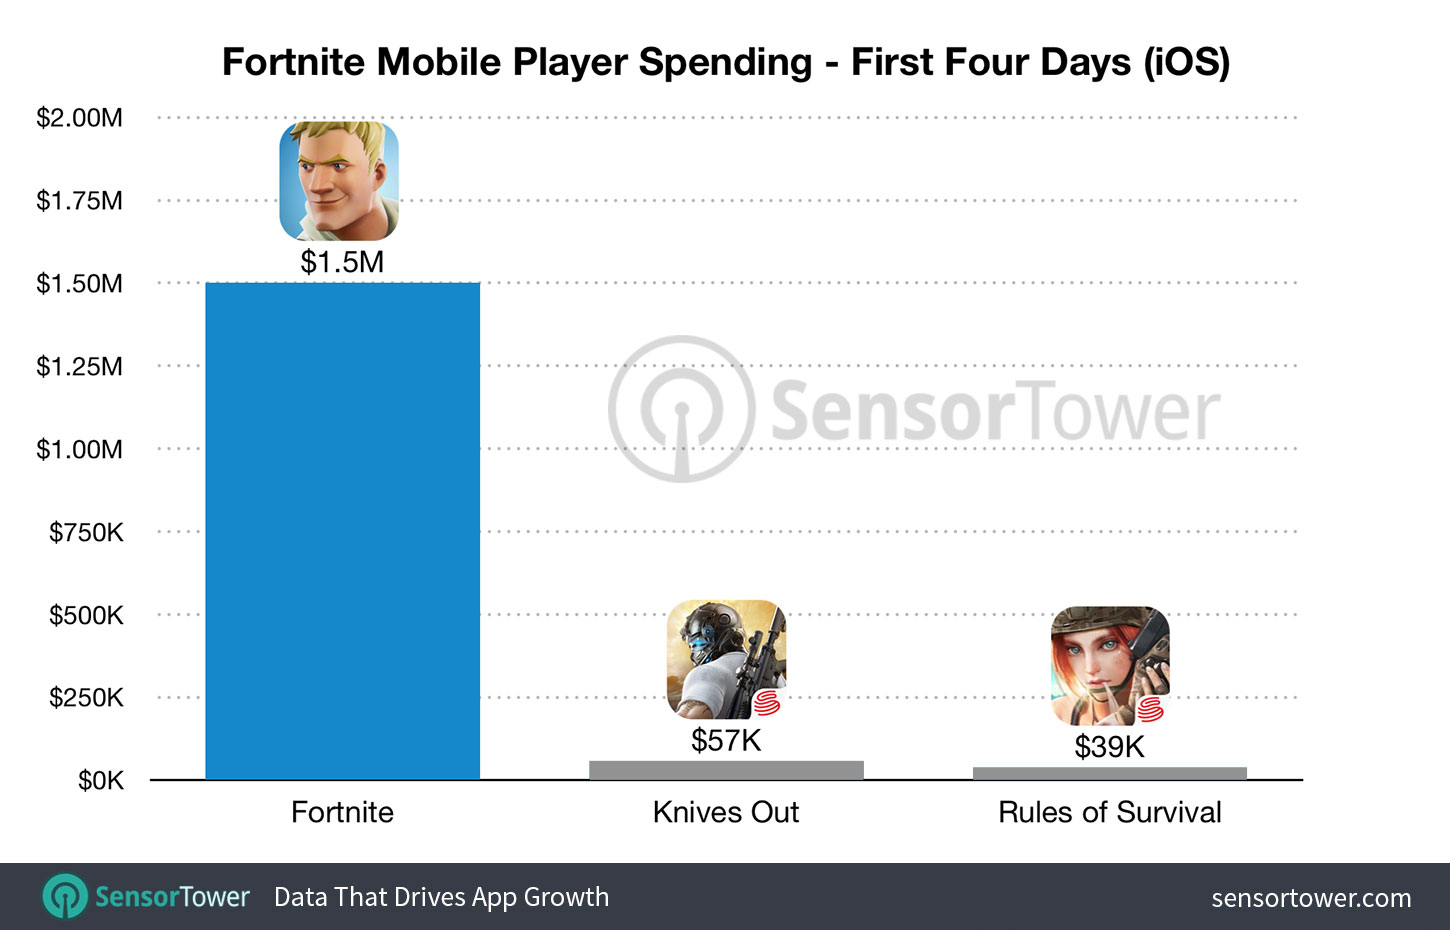 Chart showing Fortnite's first four days of gross revenue versus Knives Out and Rule of Survival